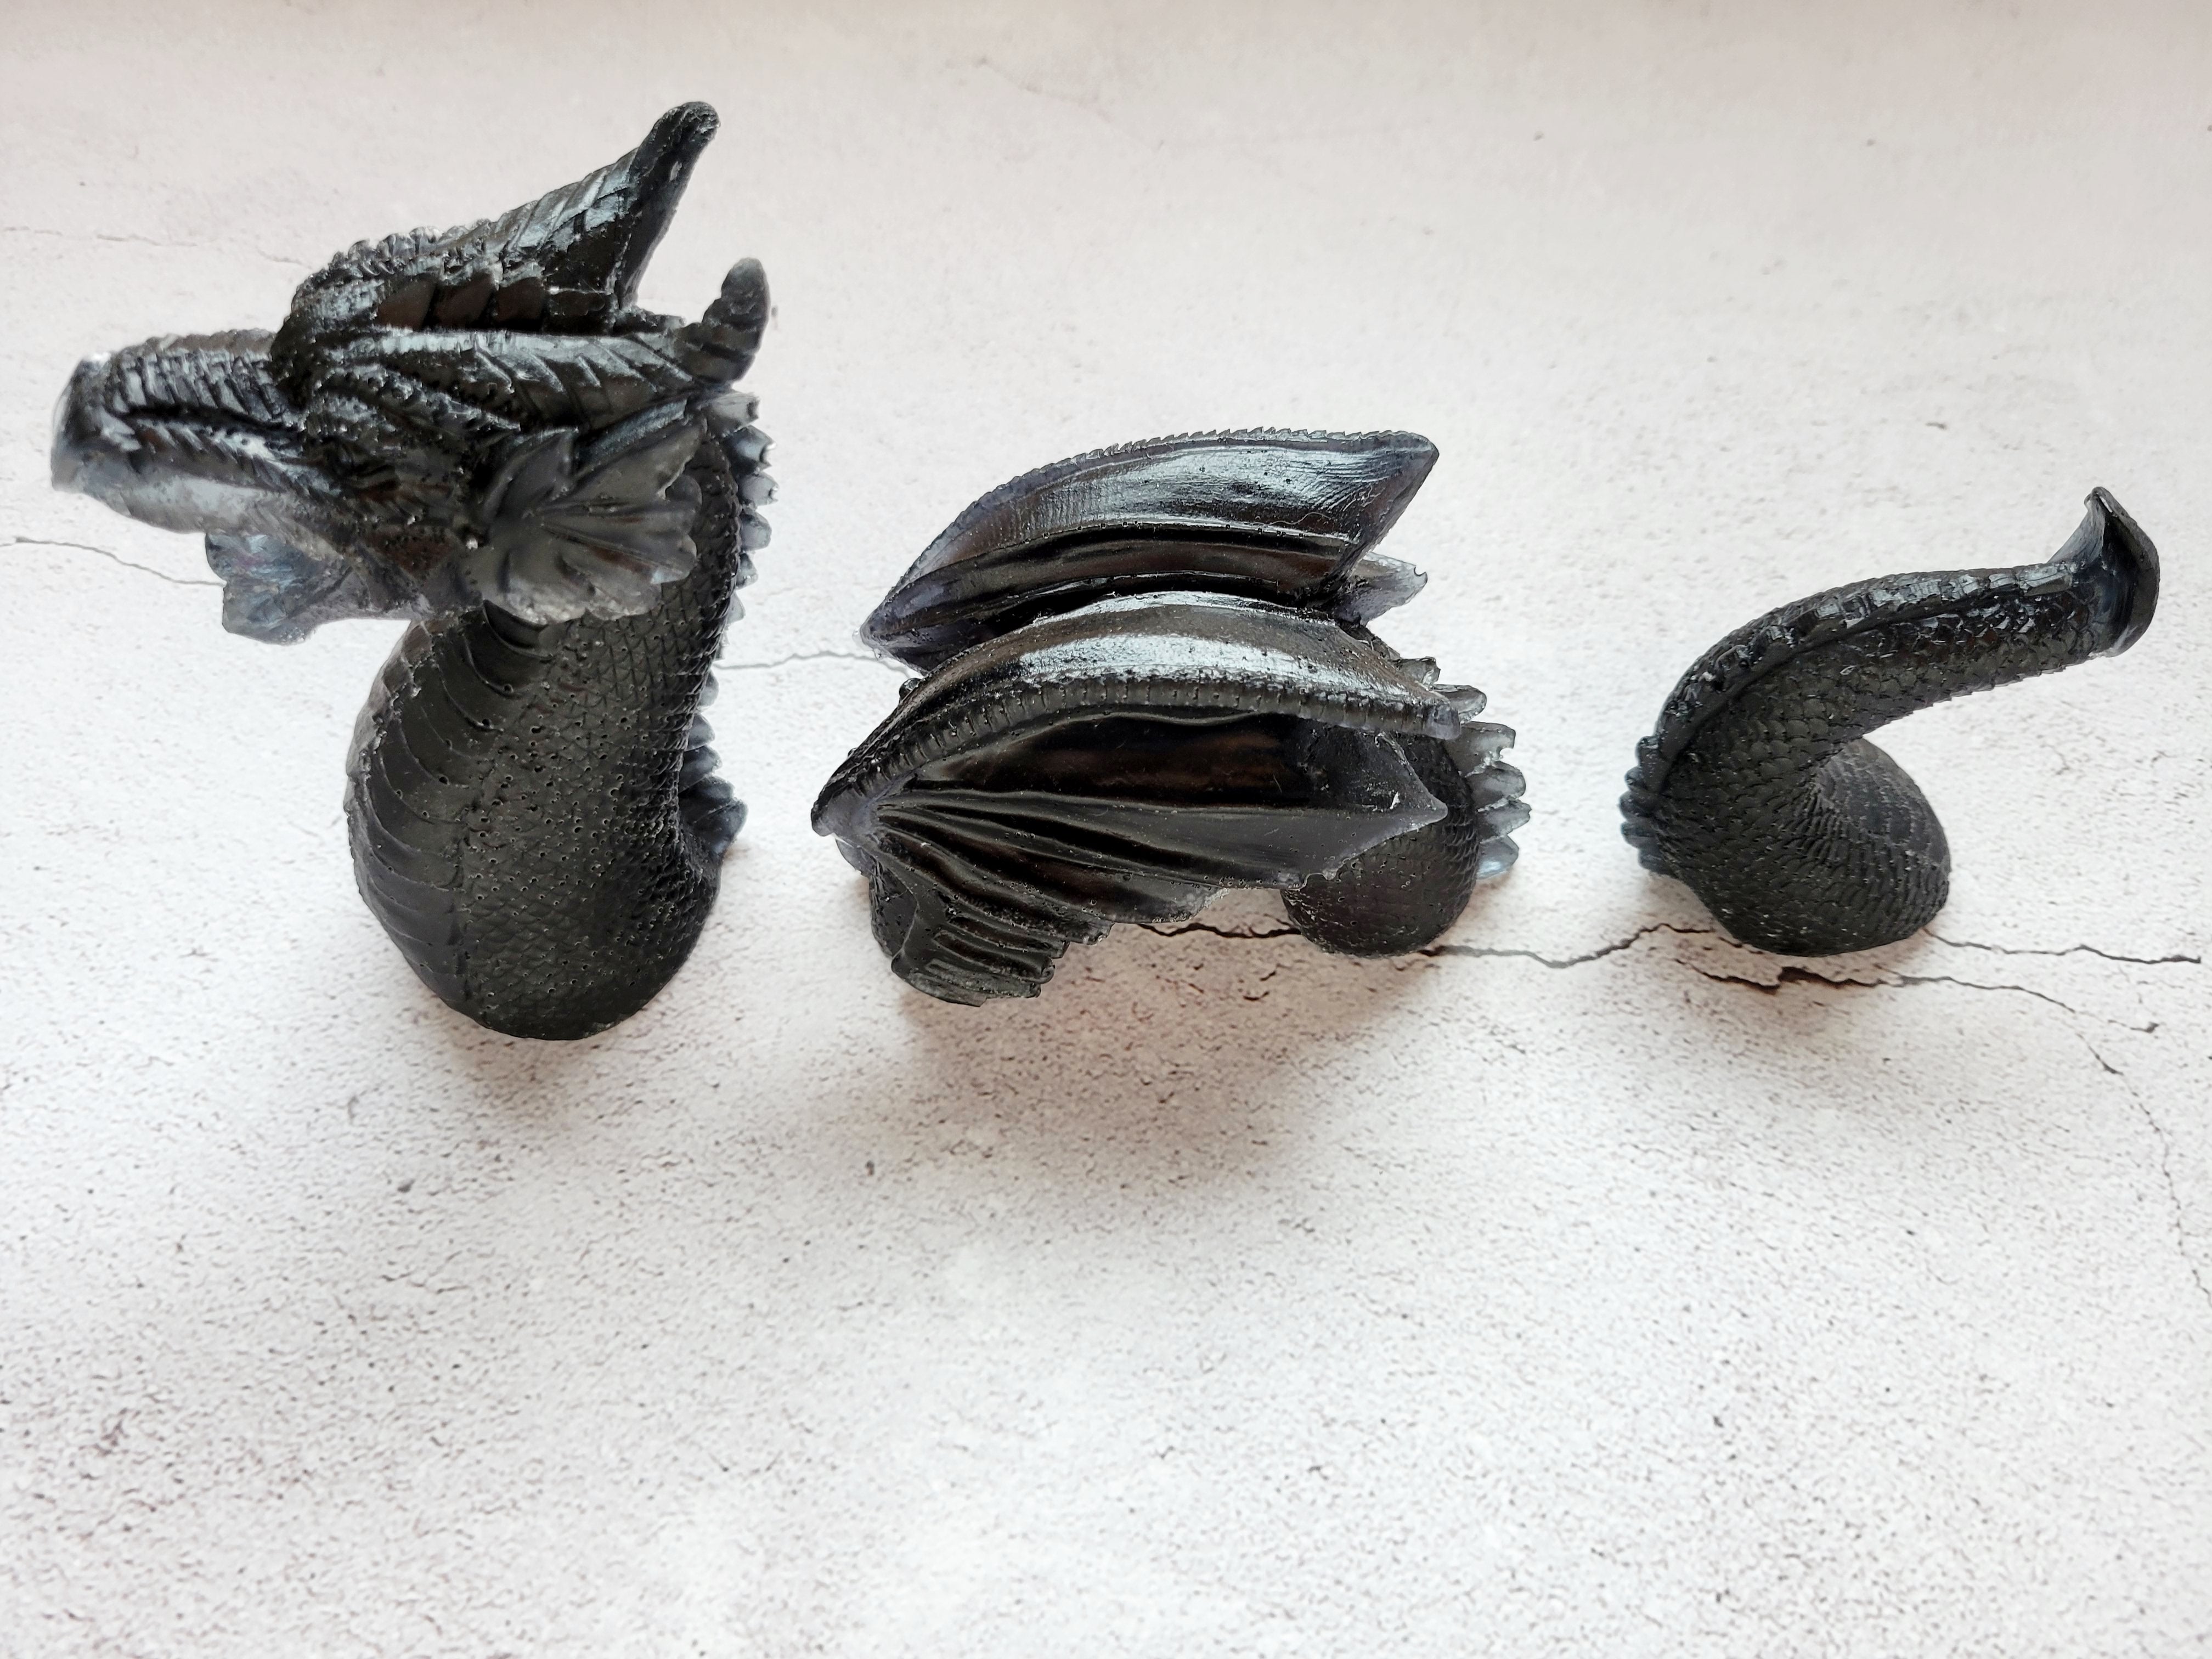 three piece resin sea serpent - Head, winged body, curved tail are all black. Top view